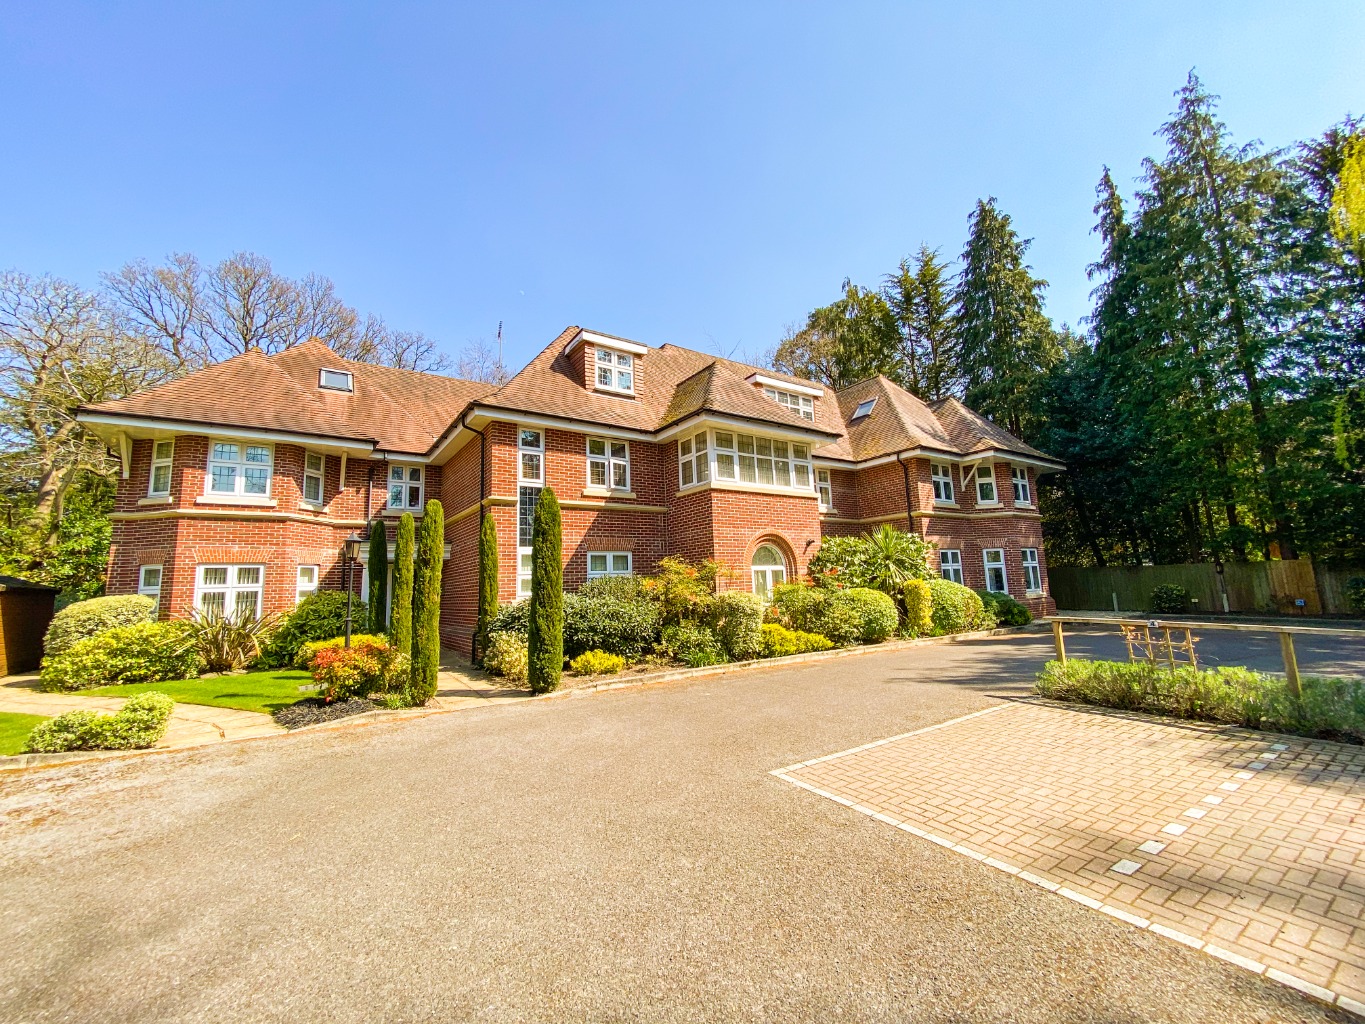 Avocado Surrey is delighted to present to the market this stunning two double bedroom two bathroom first floor apartment located in a sought after road, less than a mile away from Camberley Town Centre. This property is accessed via electric gates, enjoys beautifully landscaped communal gardens, all